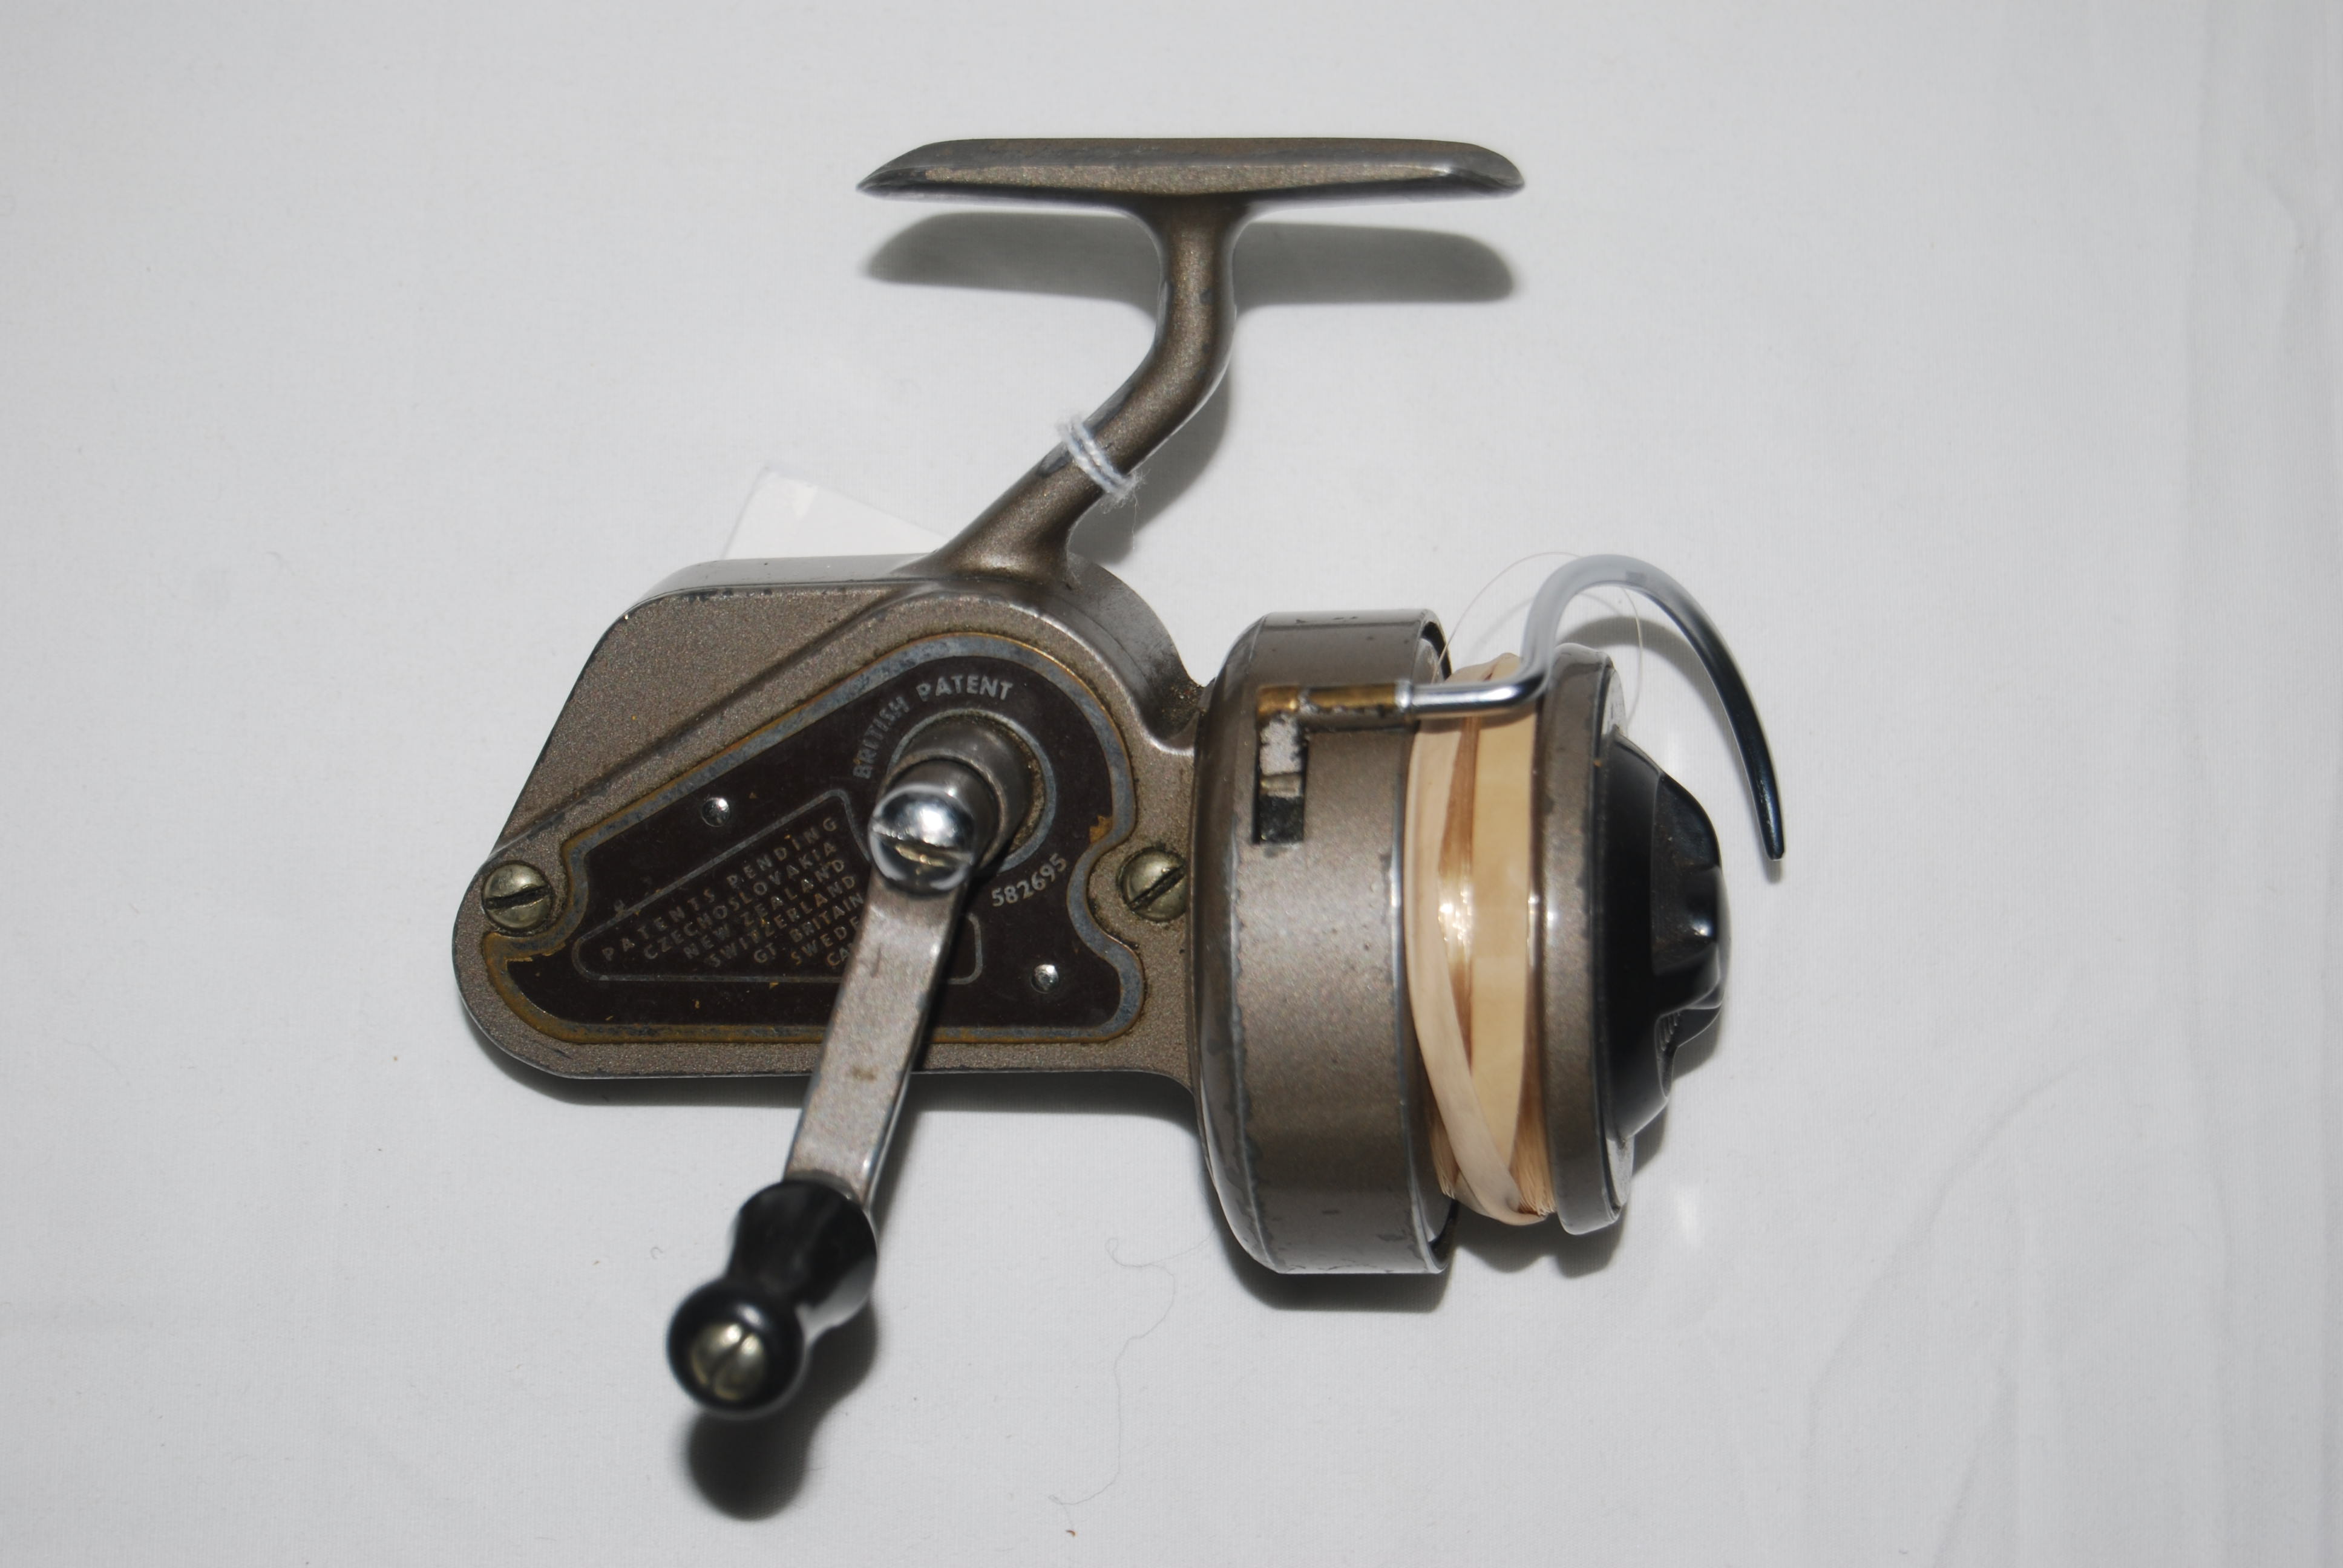 J.W. YOUNG AMBIDEX No. 2 Spin Reel. LH/RH. Circa 1947. First spinning reel  to have a reversible handle, for use LH or RH. Half-bail. In cloth bag.